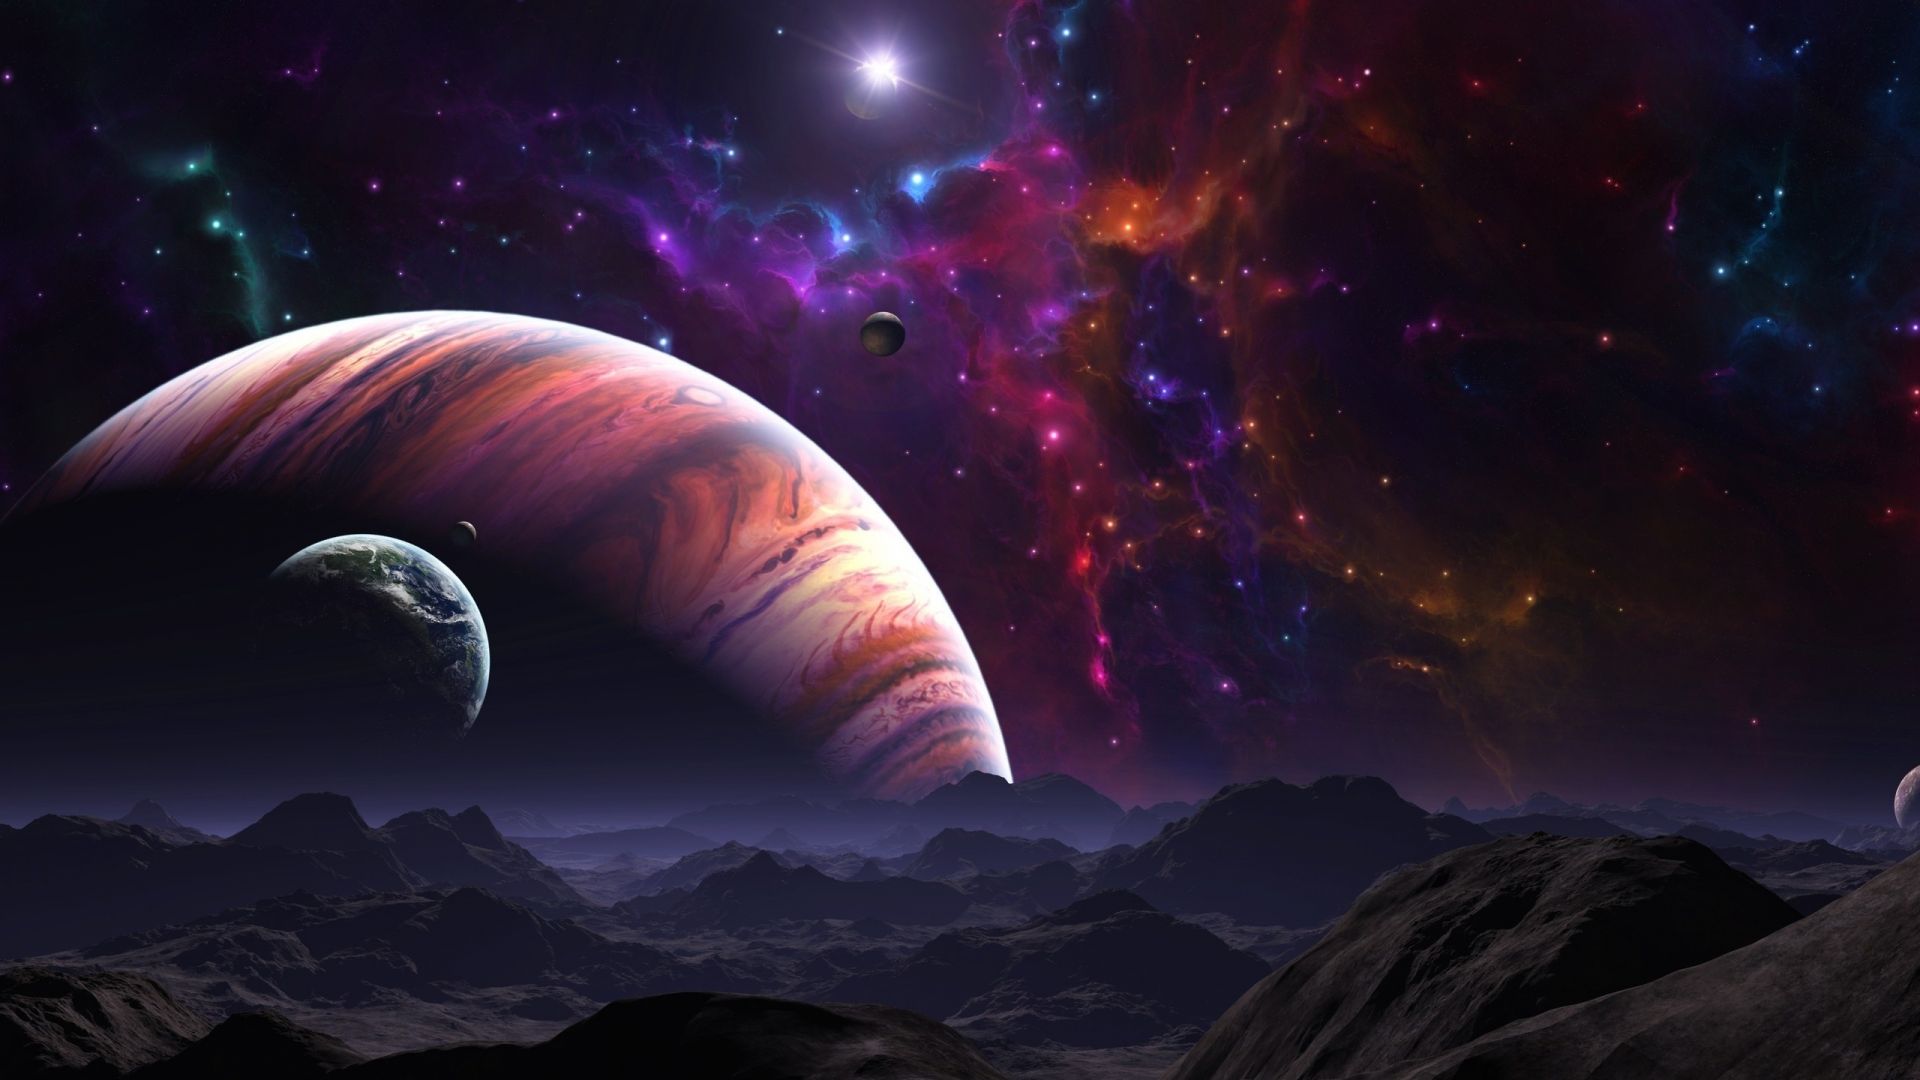 Desktop wallpaper galaxy, space, fantasy, planets, cosmos, art, HD image, picture, background, 05bf15